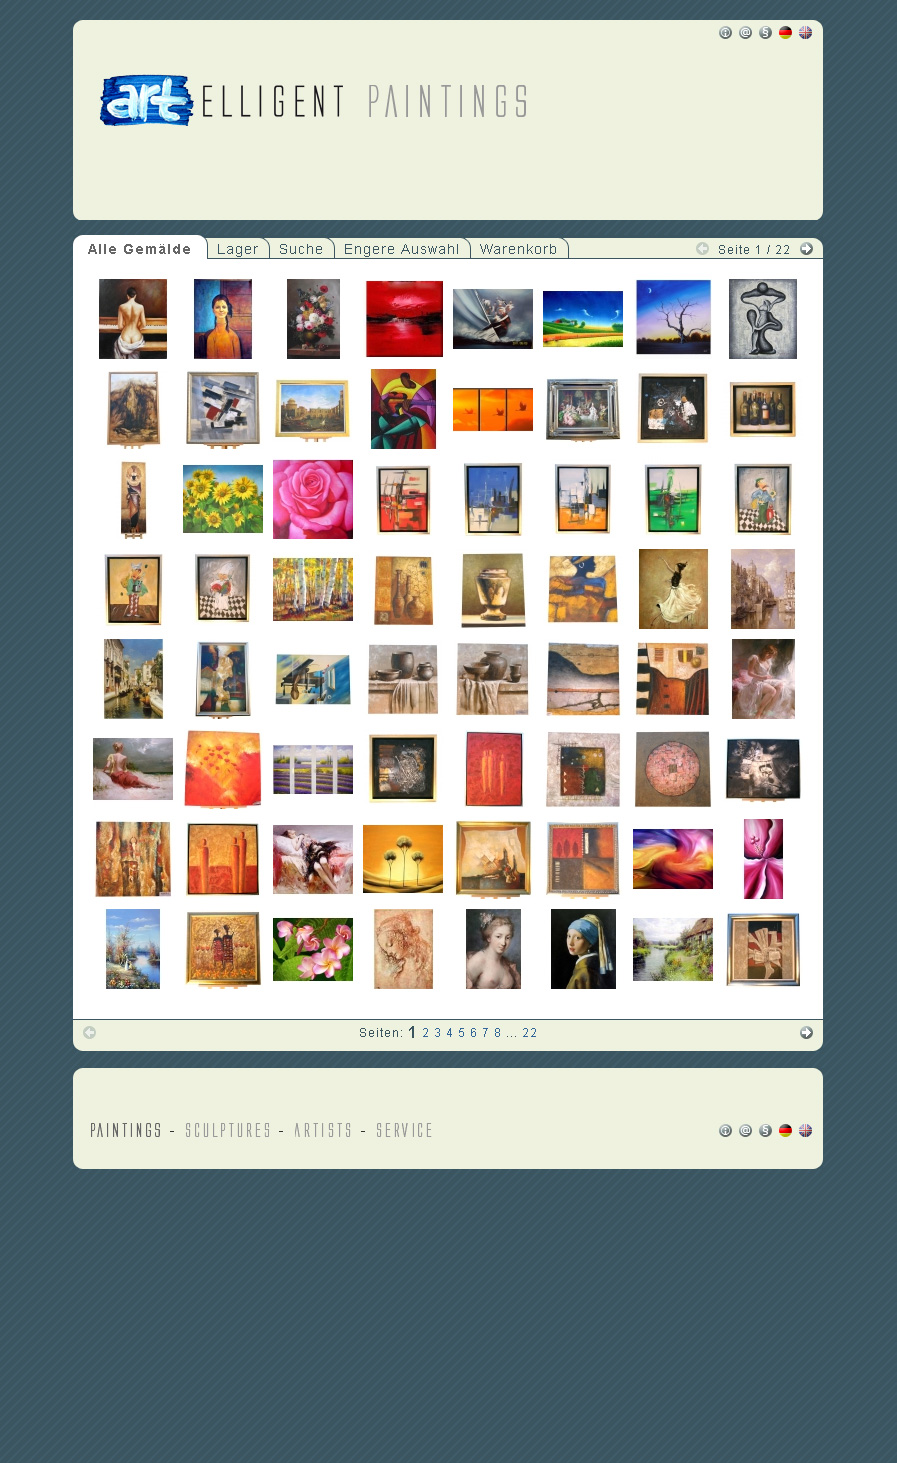 Artelligent-Gallery.de. Shop for paintings from China. With selfmade CMS and Shop system.